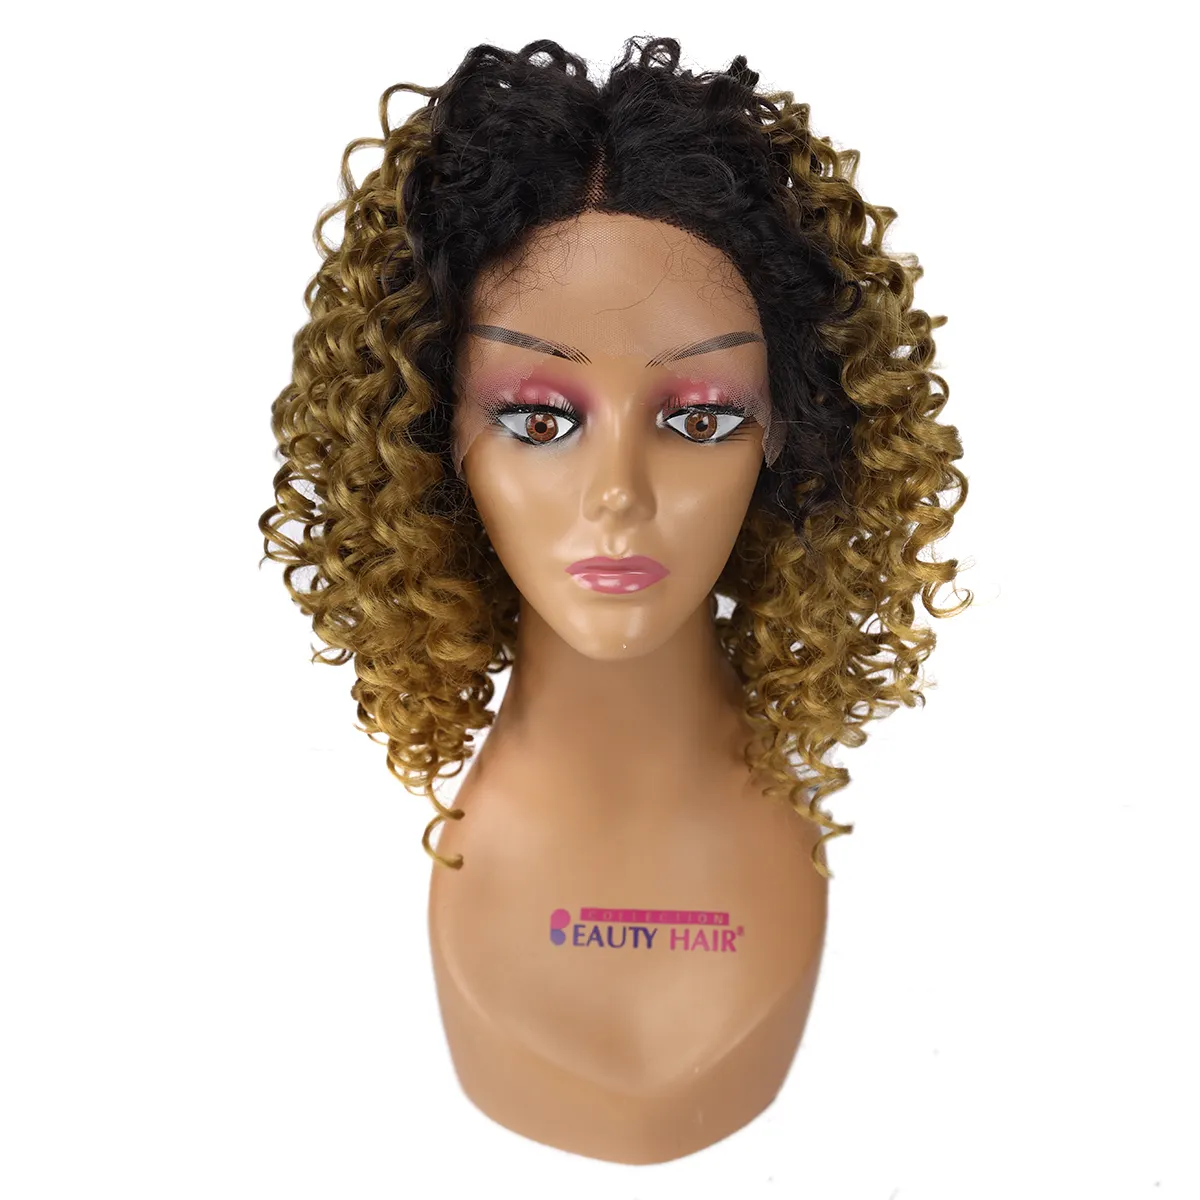 Biology Medium Curly Hair Black Lace Bob Wig Natural Deep Wave 14Inches Women's Synthetic T-Part Wigs Heat Resistant